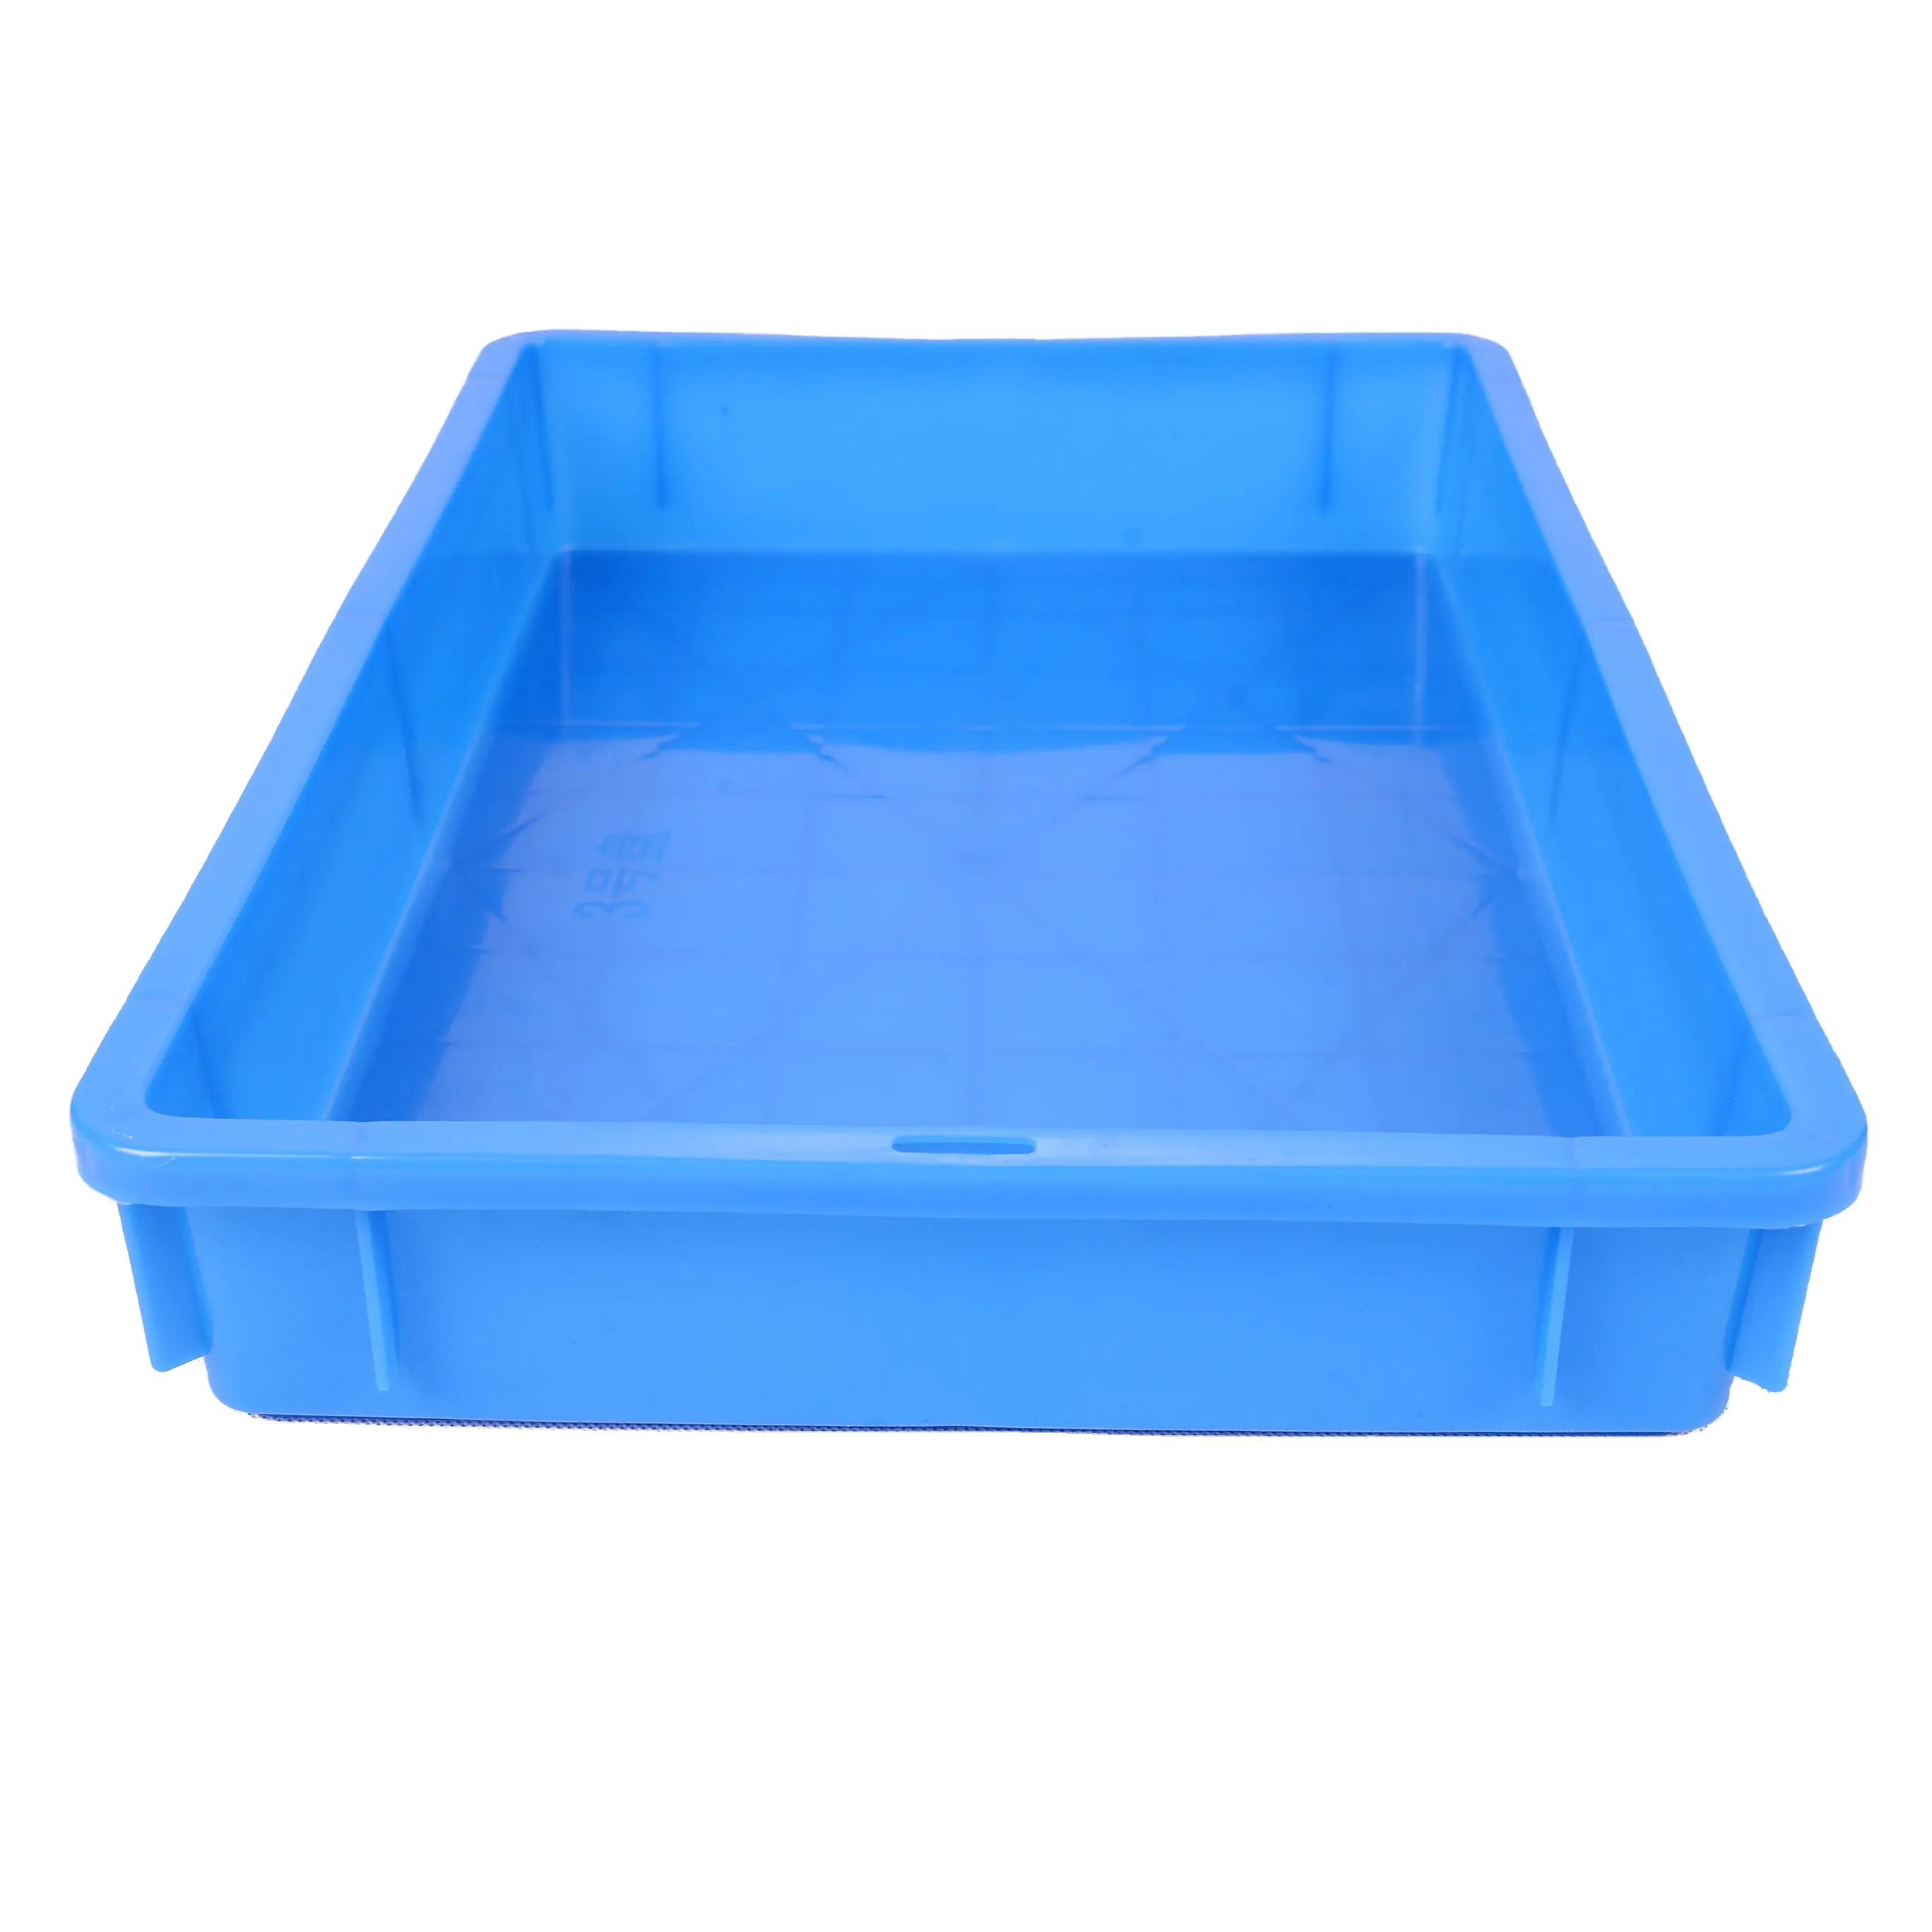 Large Plastic Seed Square Tray